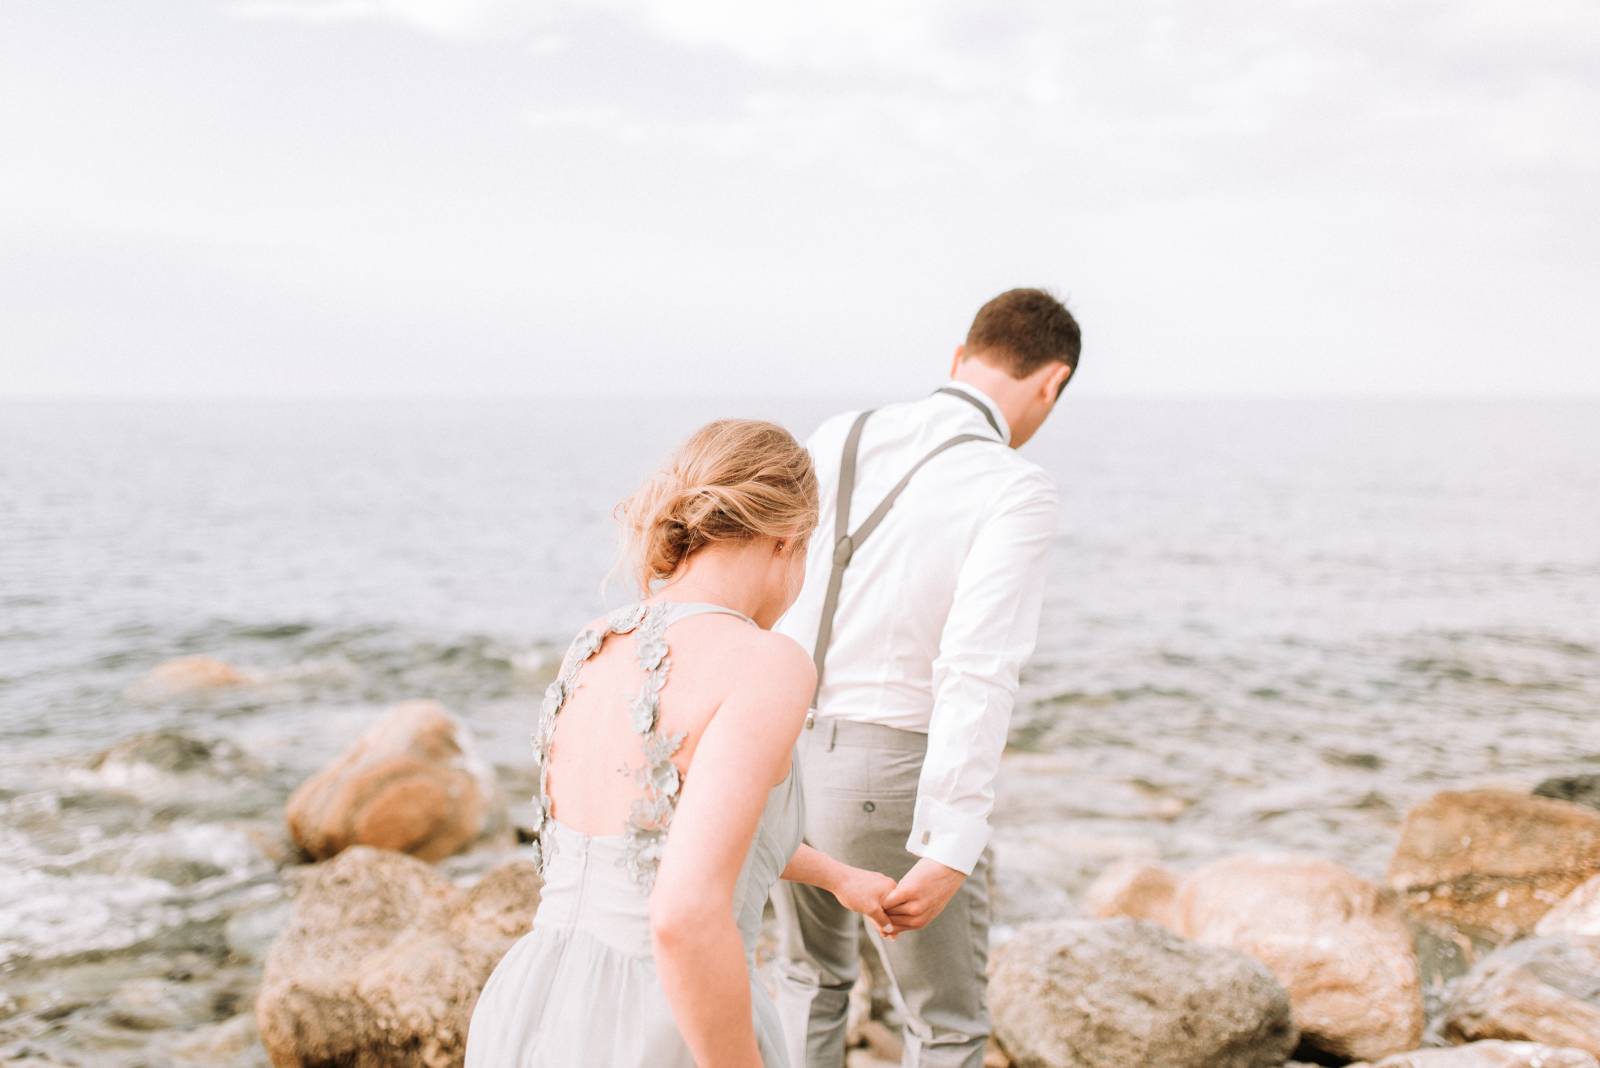 Coastal engagement shoot in Greece | Greece Engagement | Gallery | Item 44